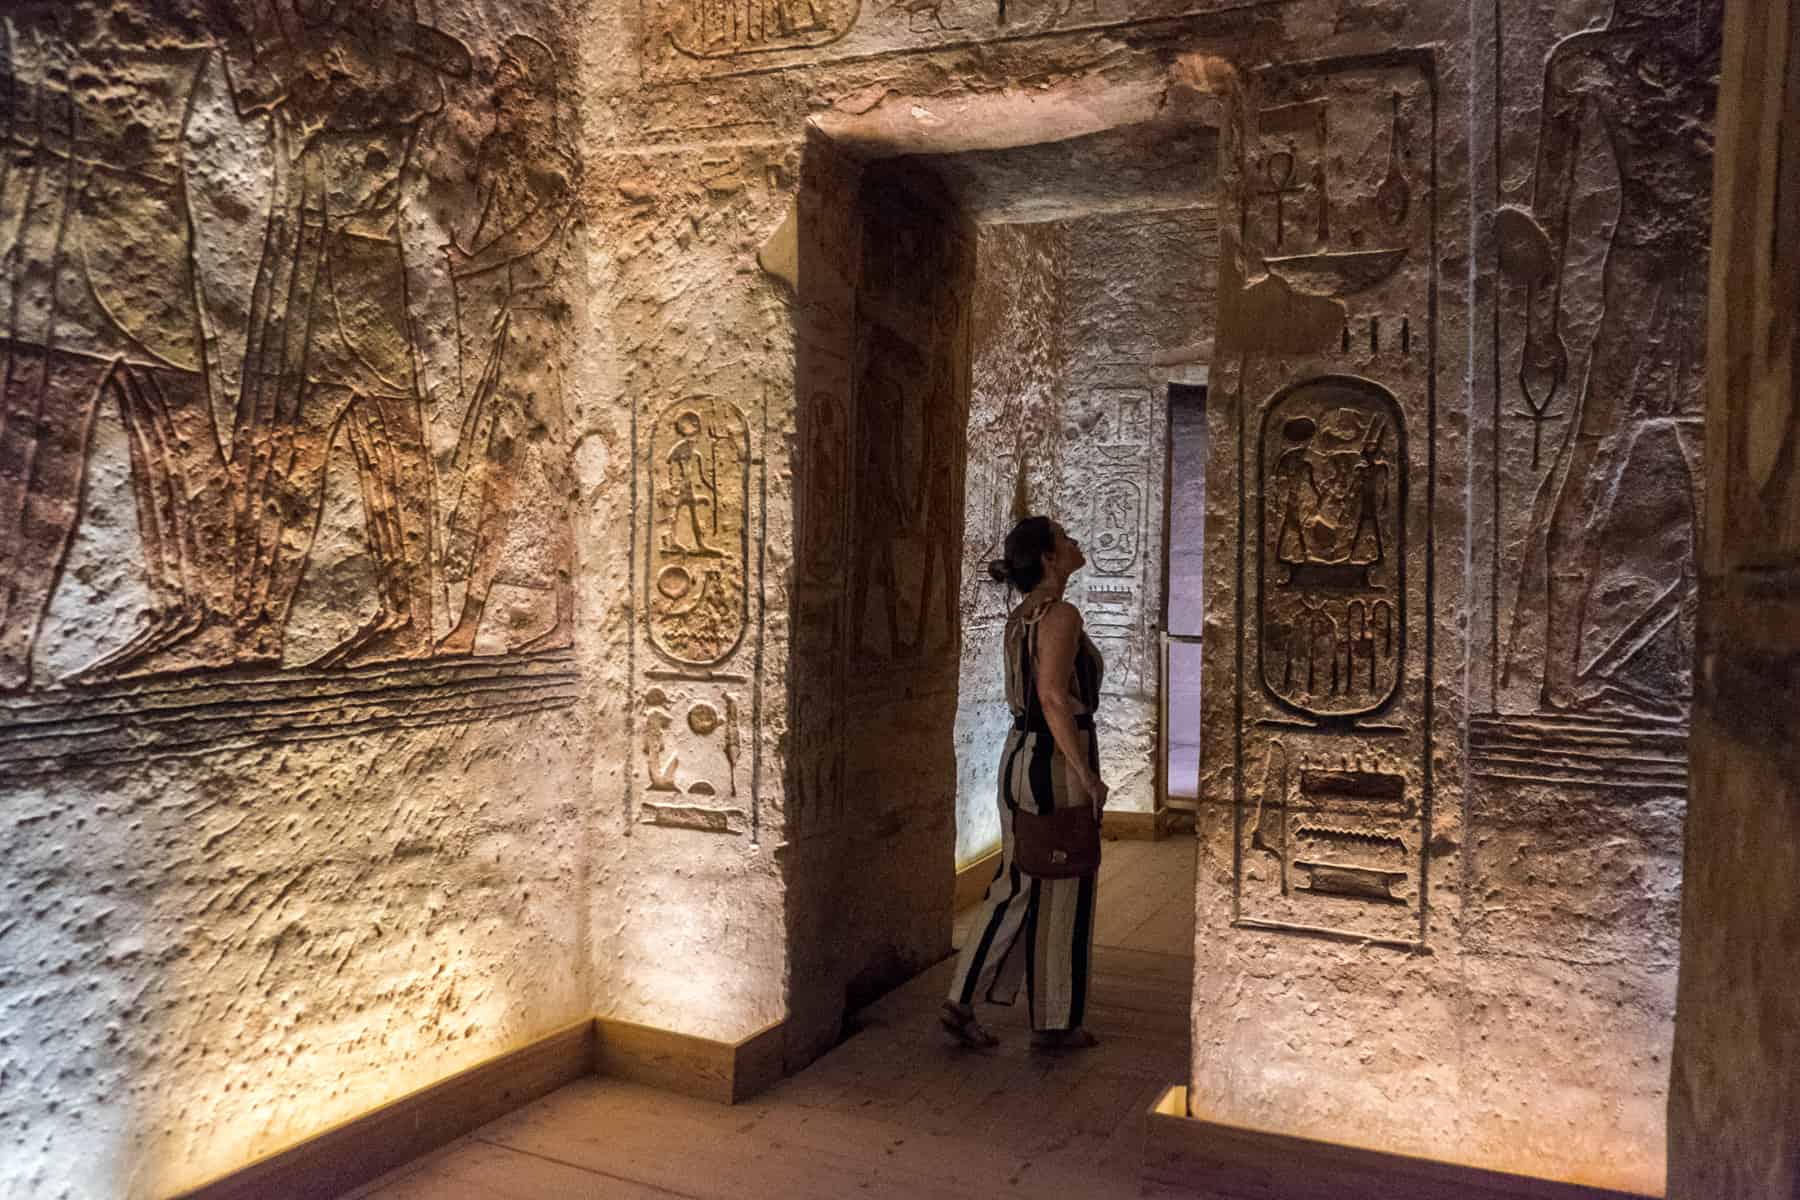 Inside the temple of Abu Simbel where wall carvings, pictures and Hieroglyphic are on show under golden light